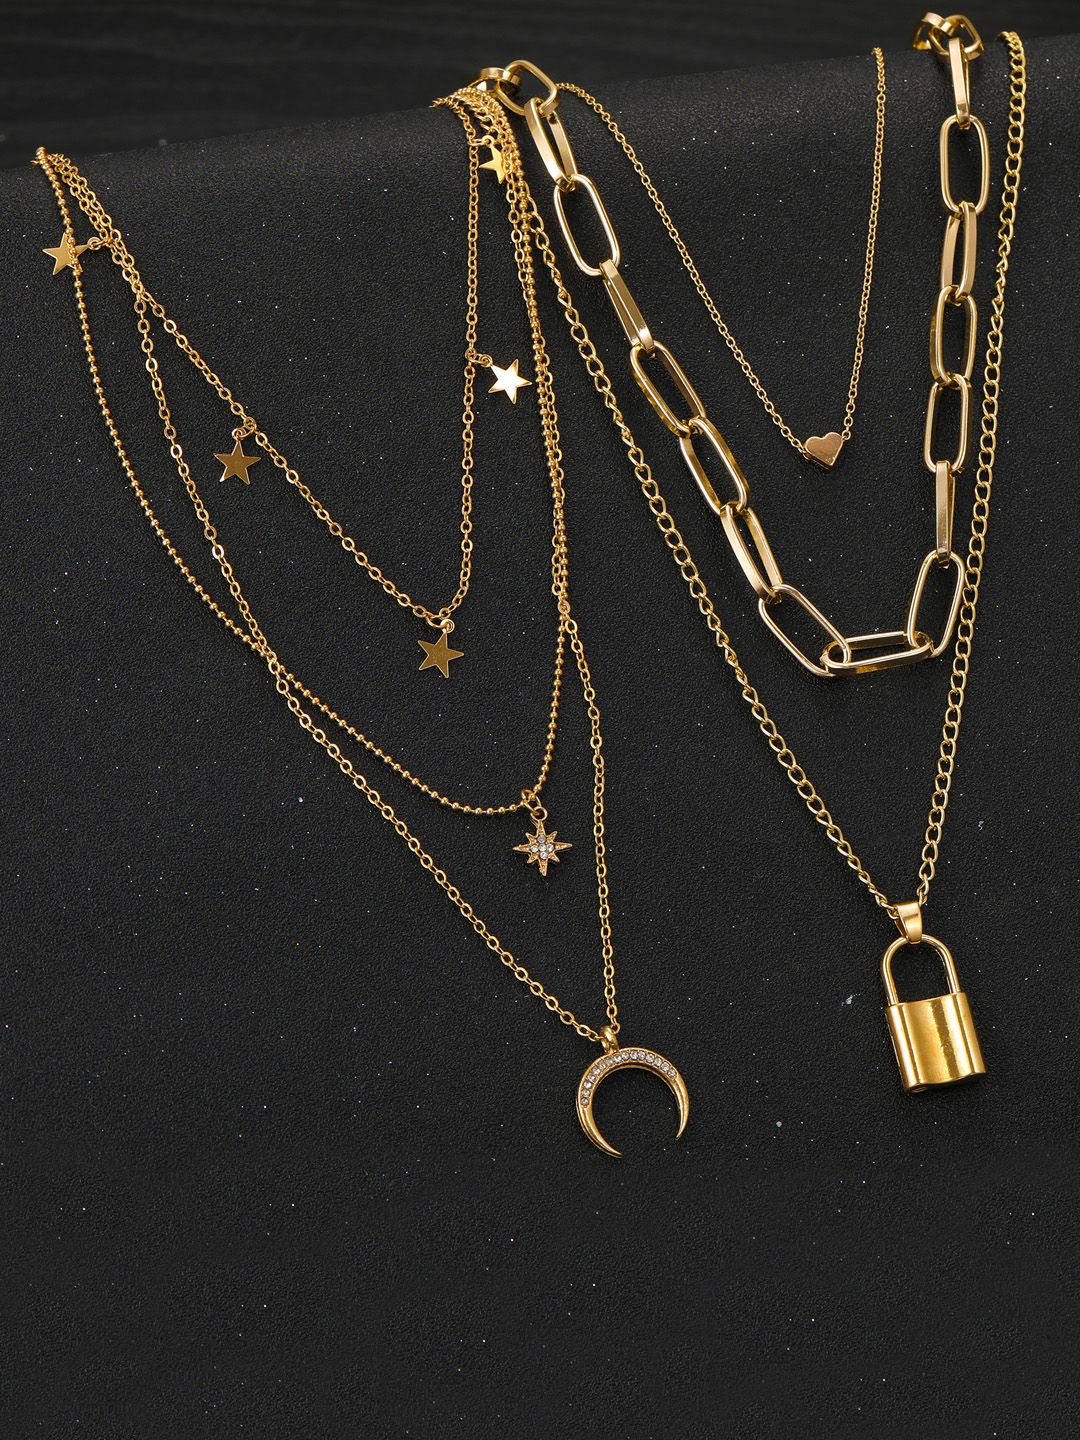 Jewels Galaxy Set of 2 Gold-Plated Layered Necklaces Price in India